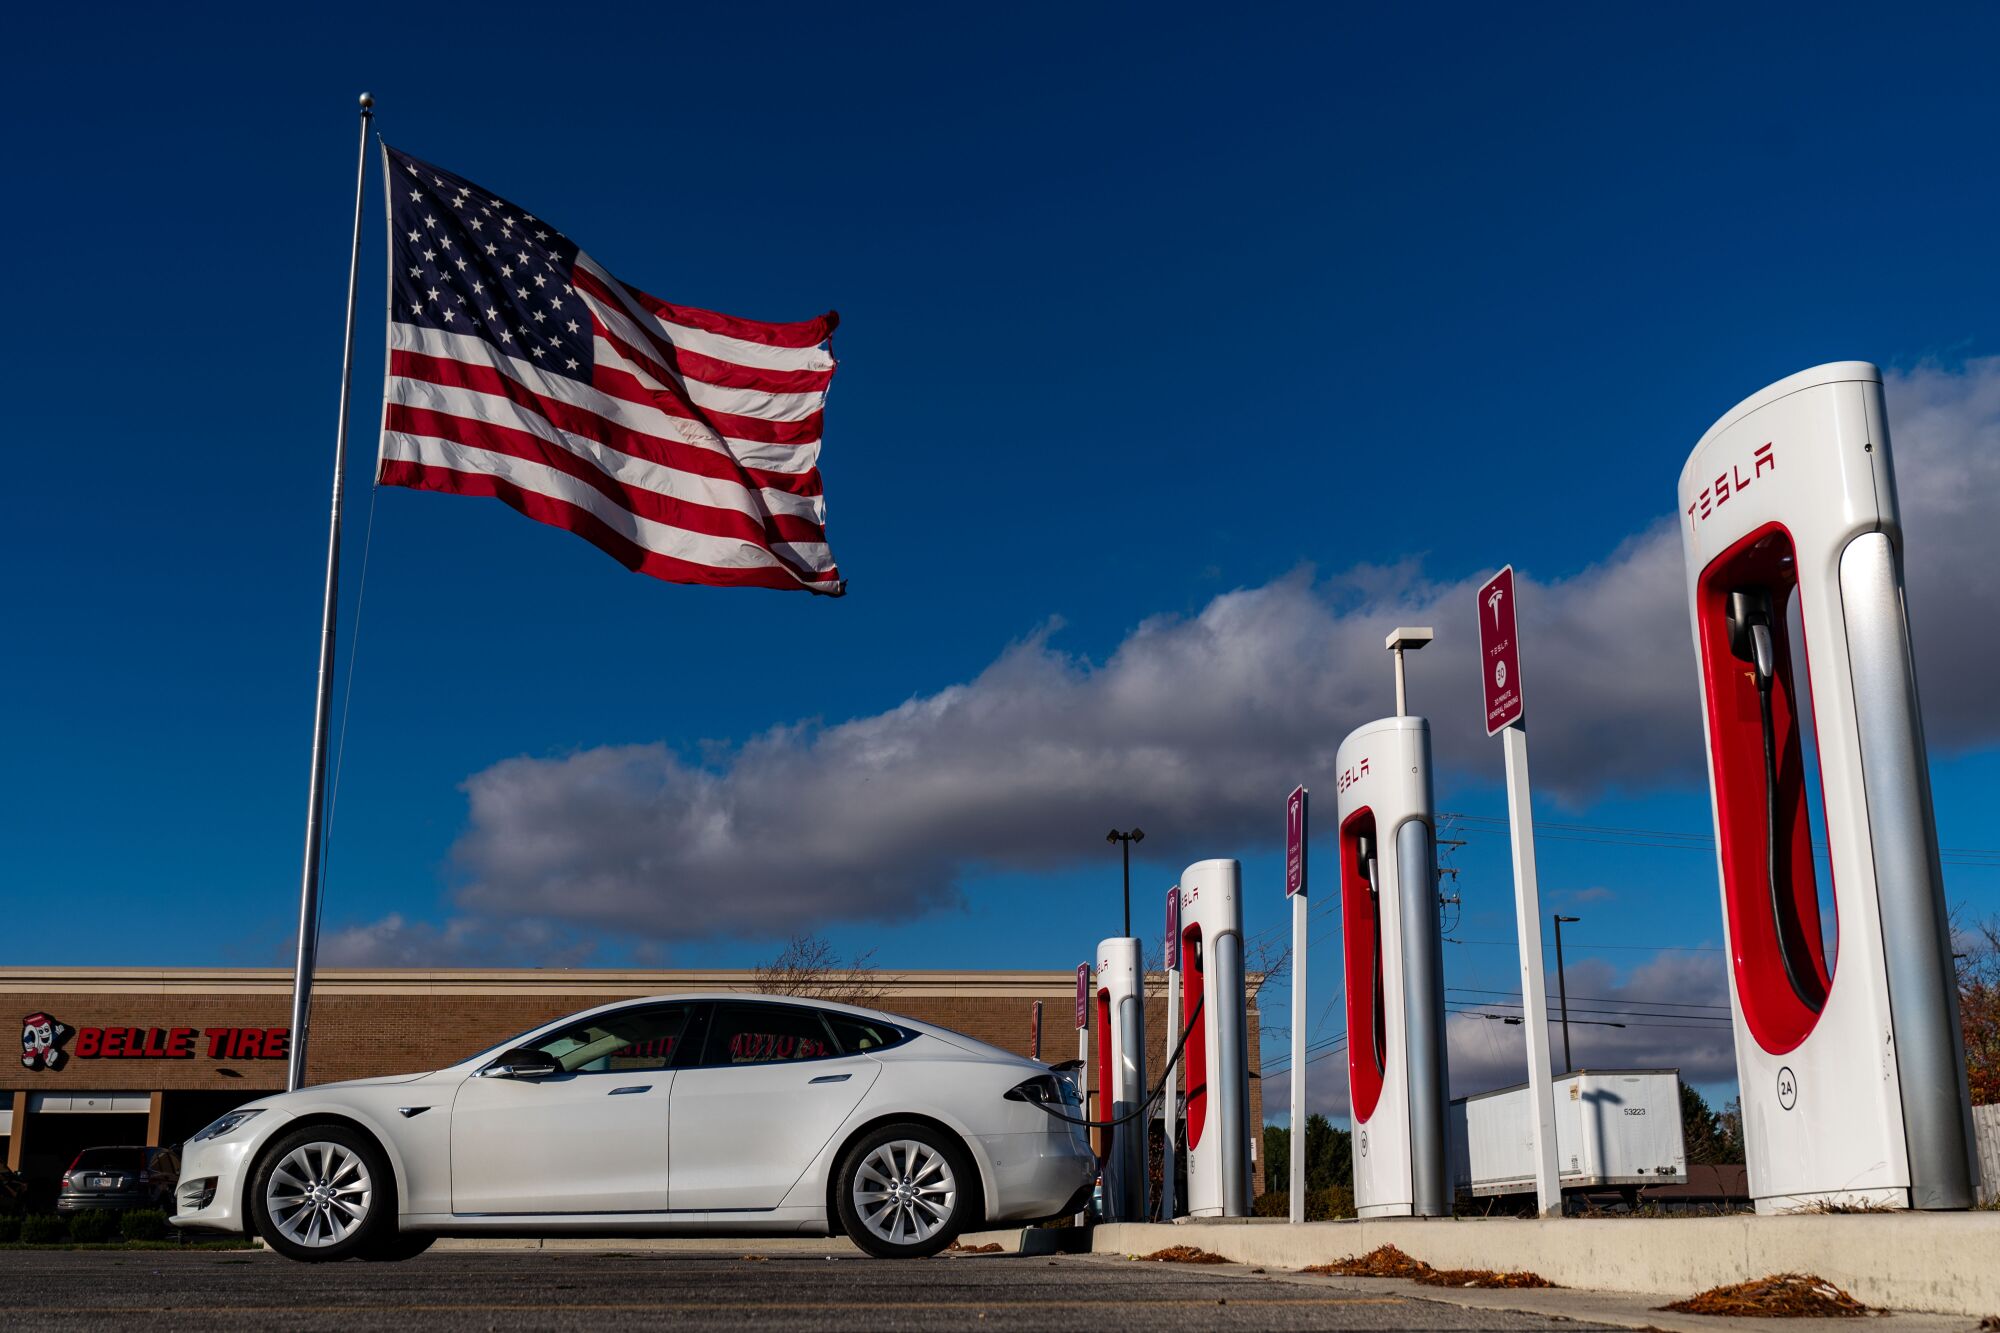 A U.S. flag flies near a white car parked in front of a row of vertical white-and-red structures with the word Tesla on them